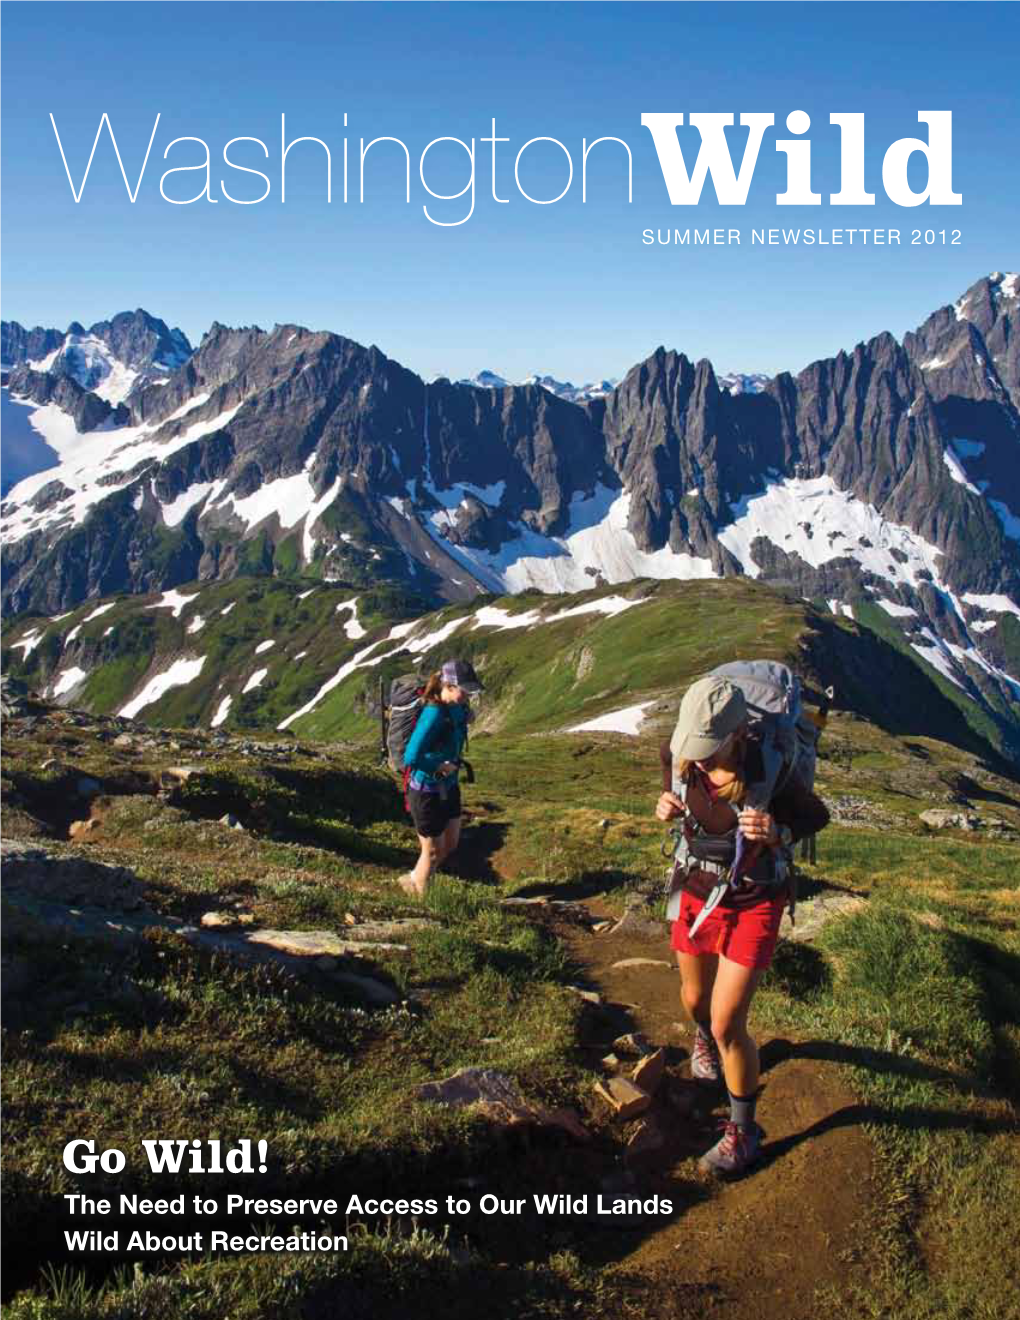 Go Wild! the Need to Preserve Access to Our Wild Lands Wild About Recreation Washington Wild Dear Friends